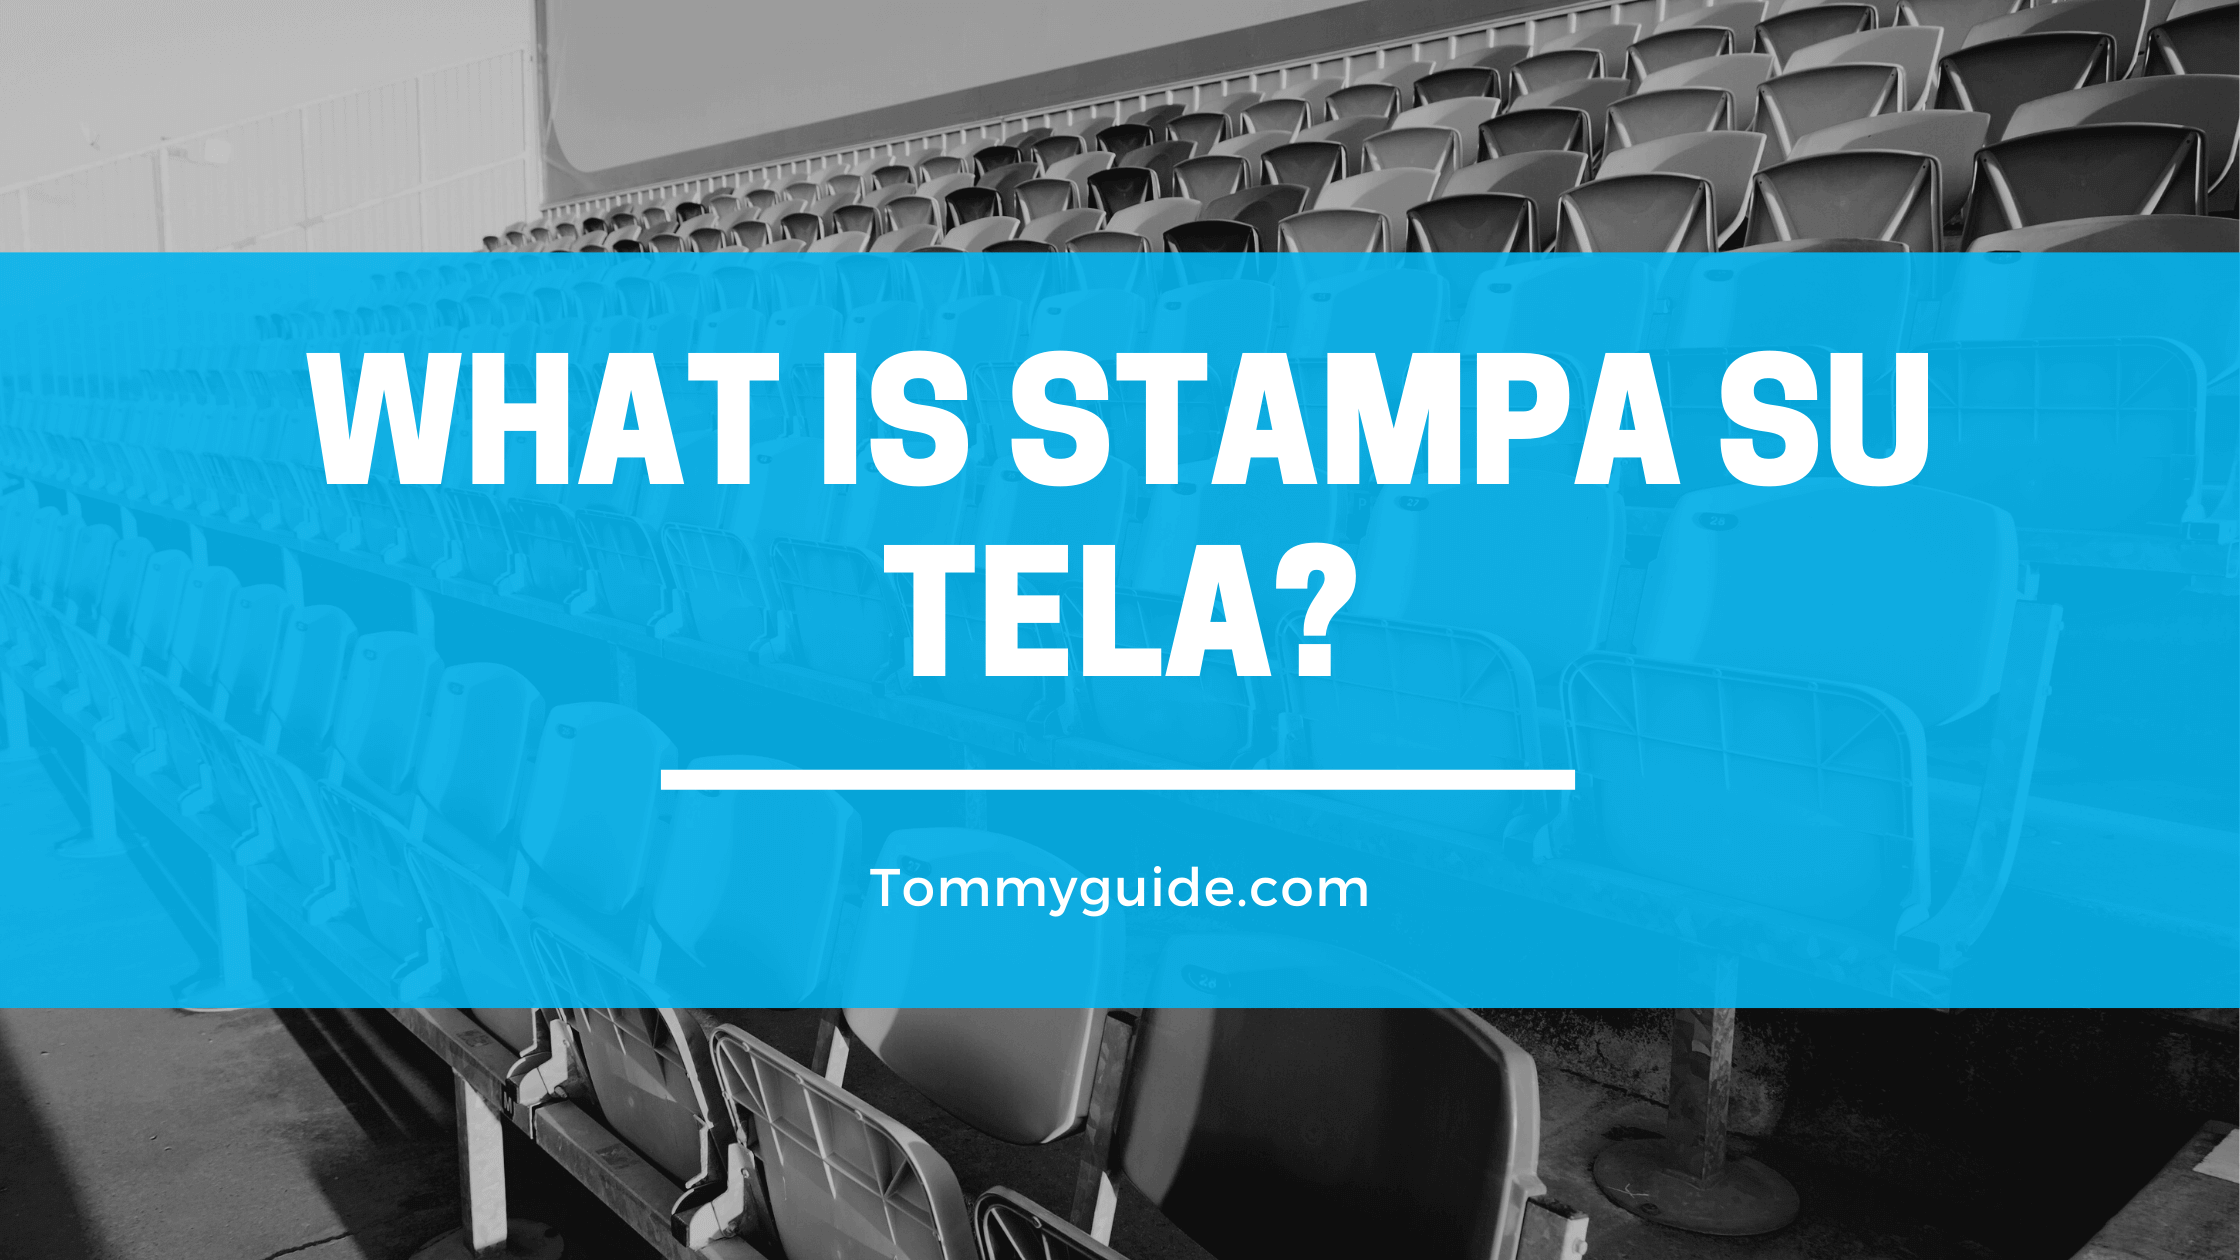 What is Stampa Su Tela?